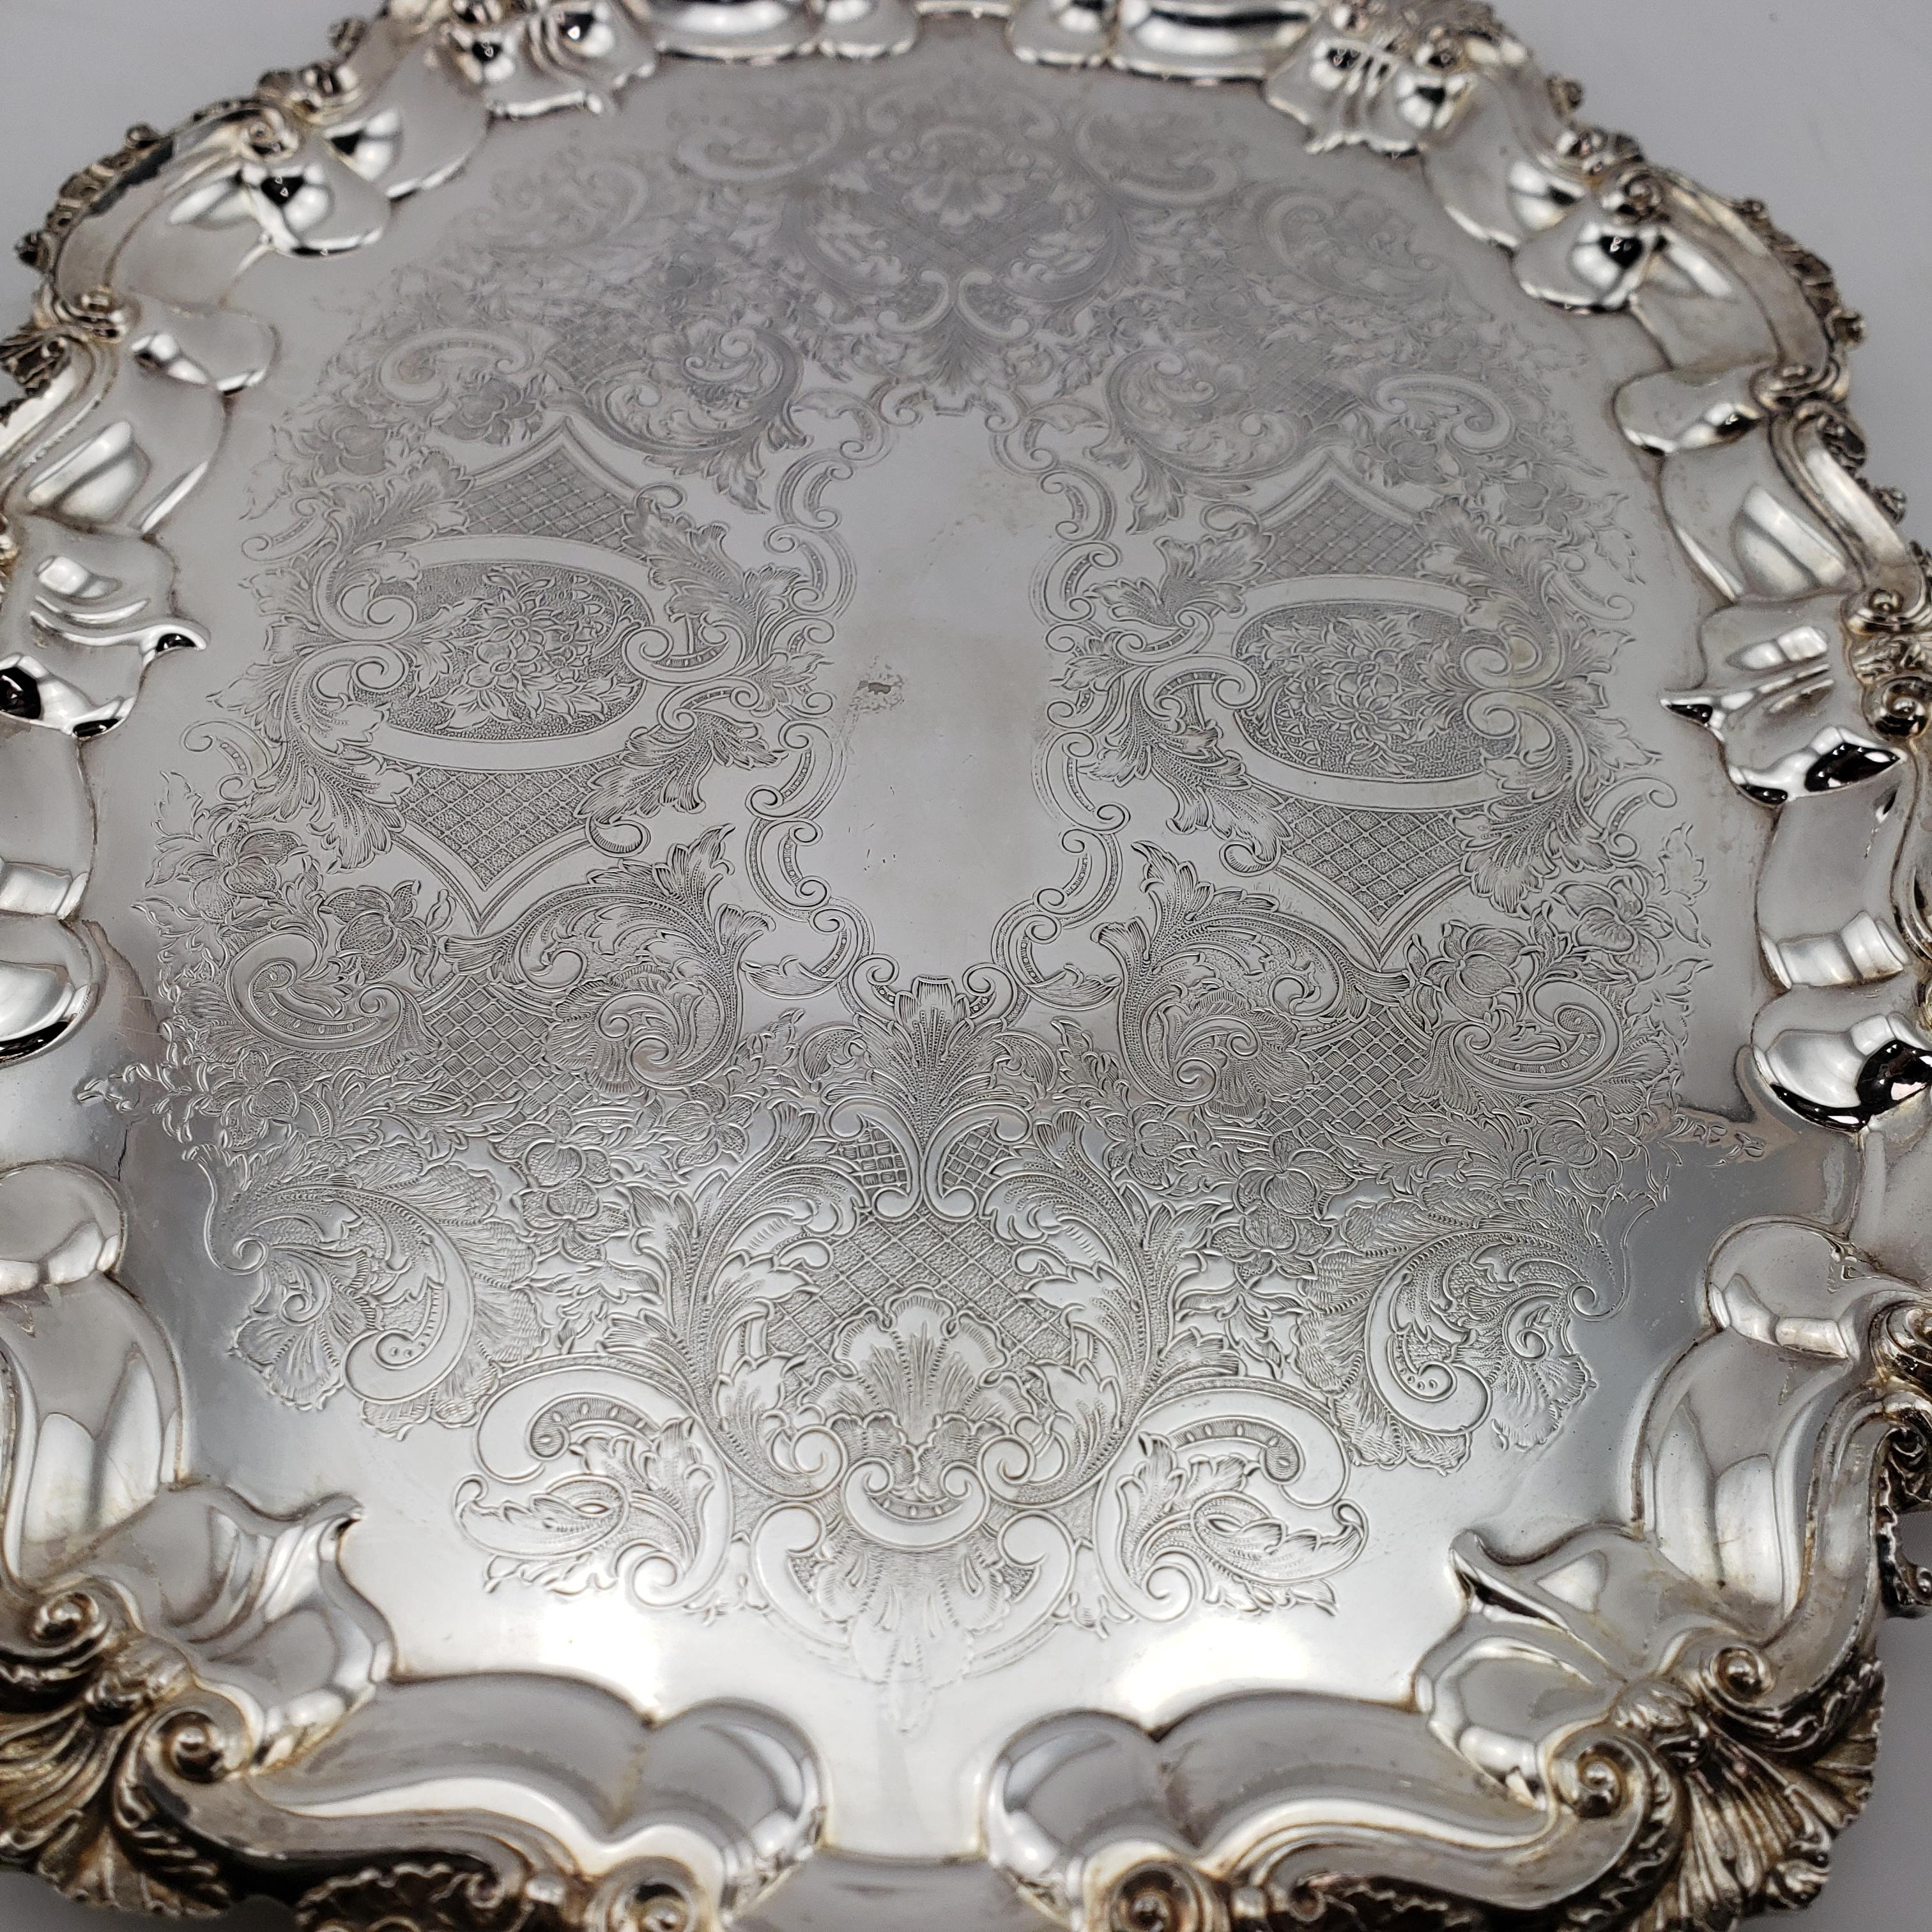 Large Antique Primrose Plate Silver Plated Serving Tray with Floral Decoration For Sale 2